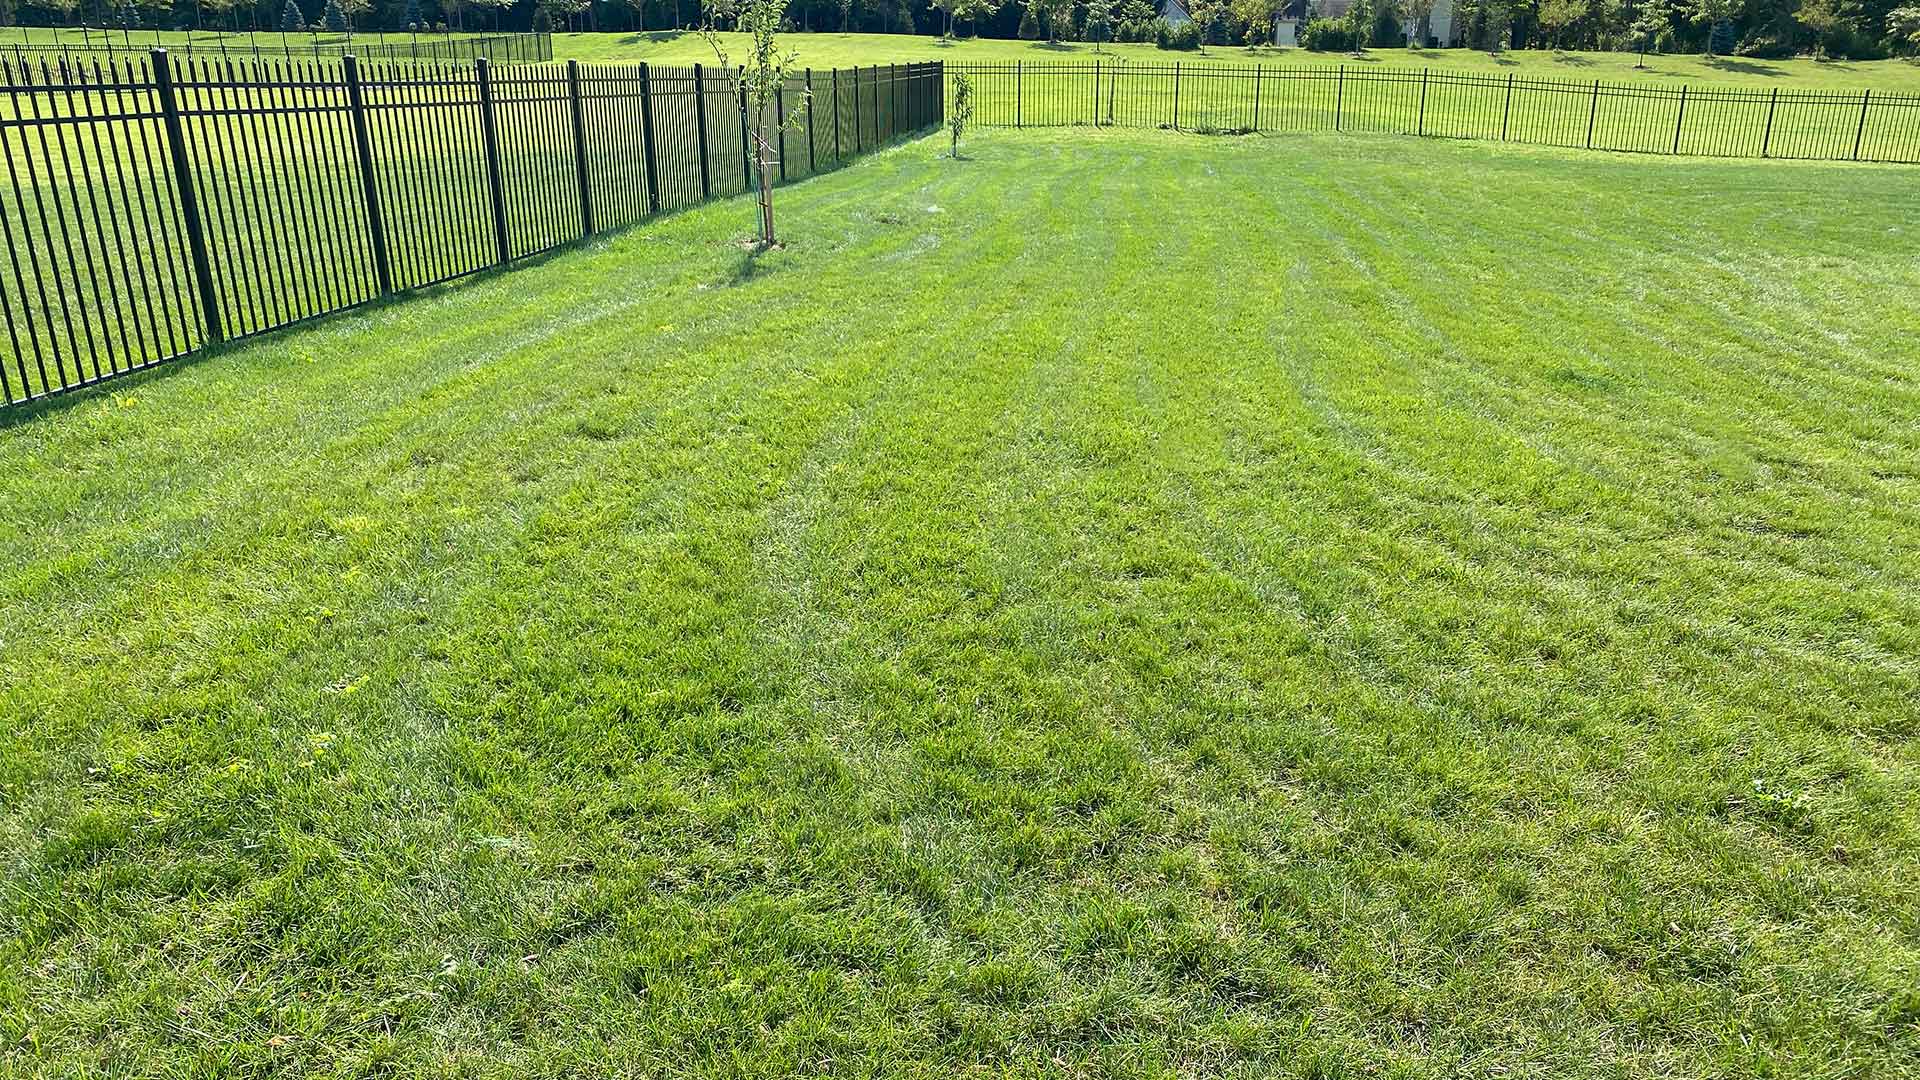 Thick, green lawn inside an iron fenced back yard of a home near Telford, PA.